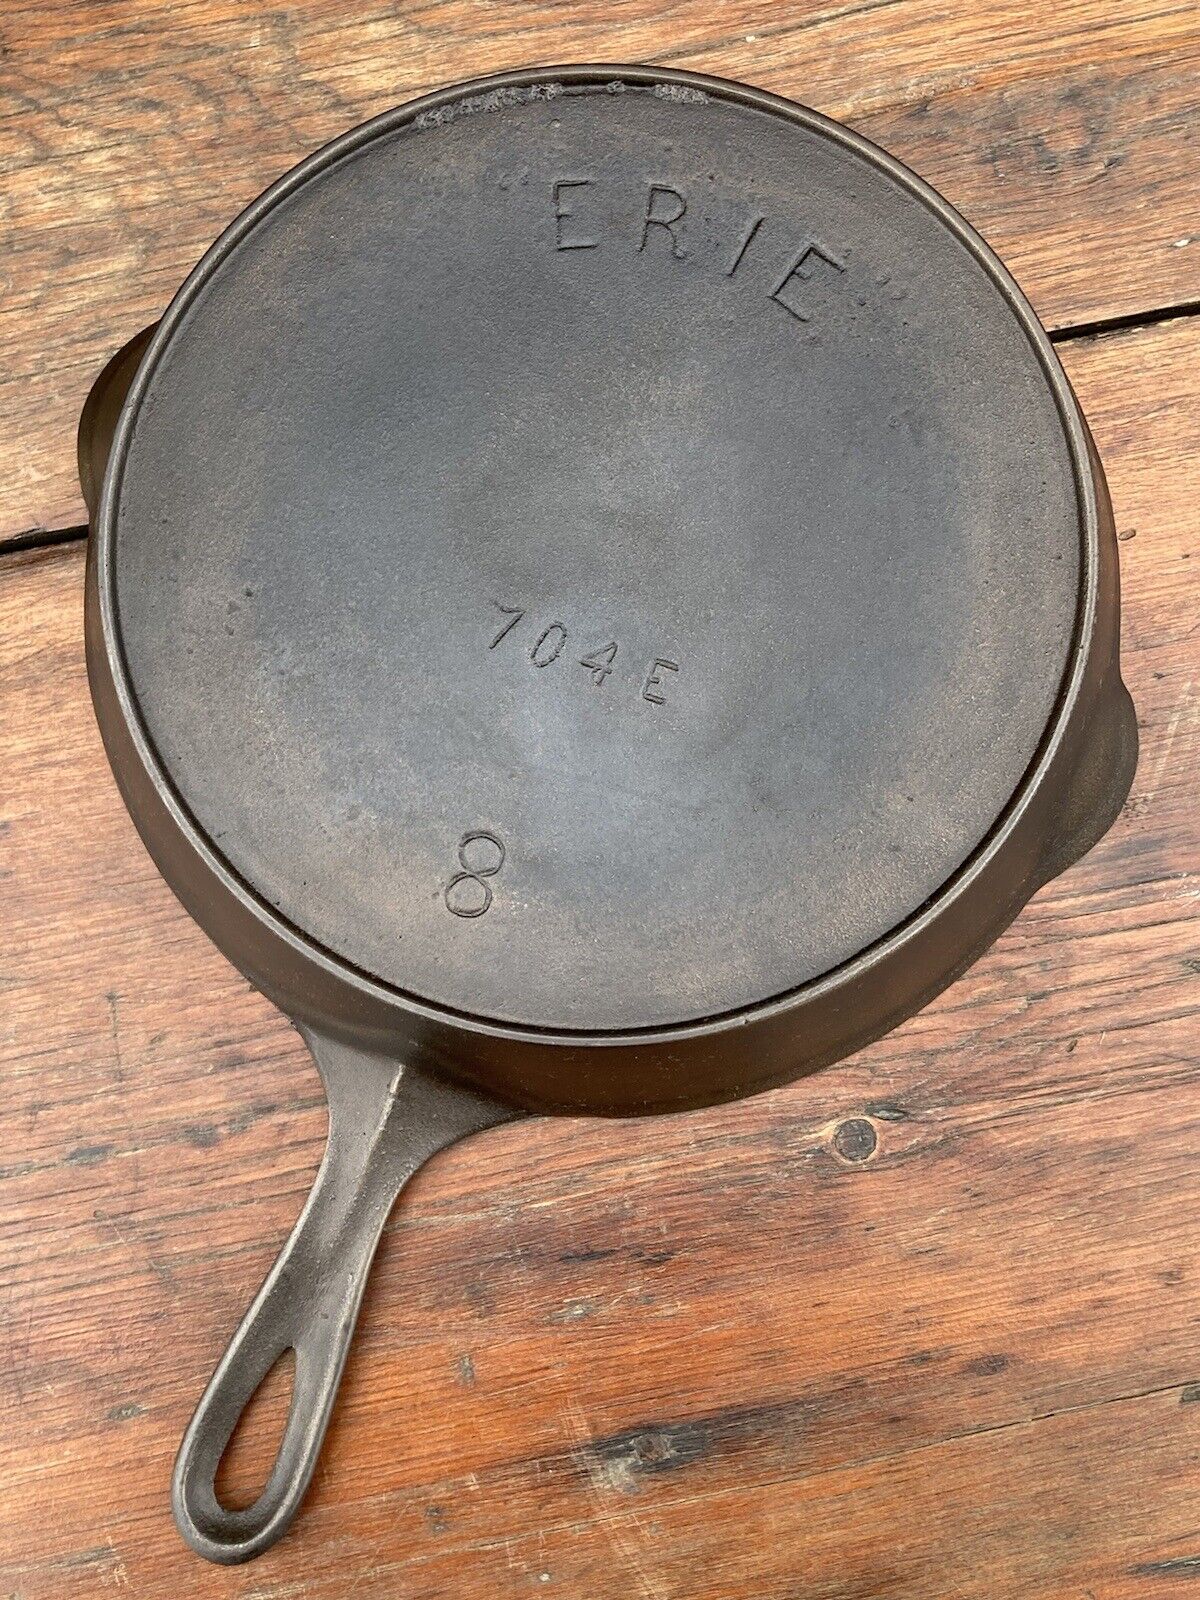 Pre Griswold Erie #8 Third Series Cast Iron Skillet